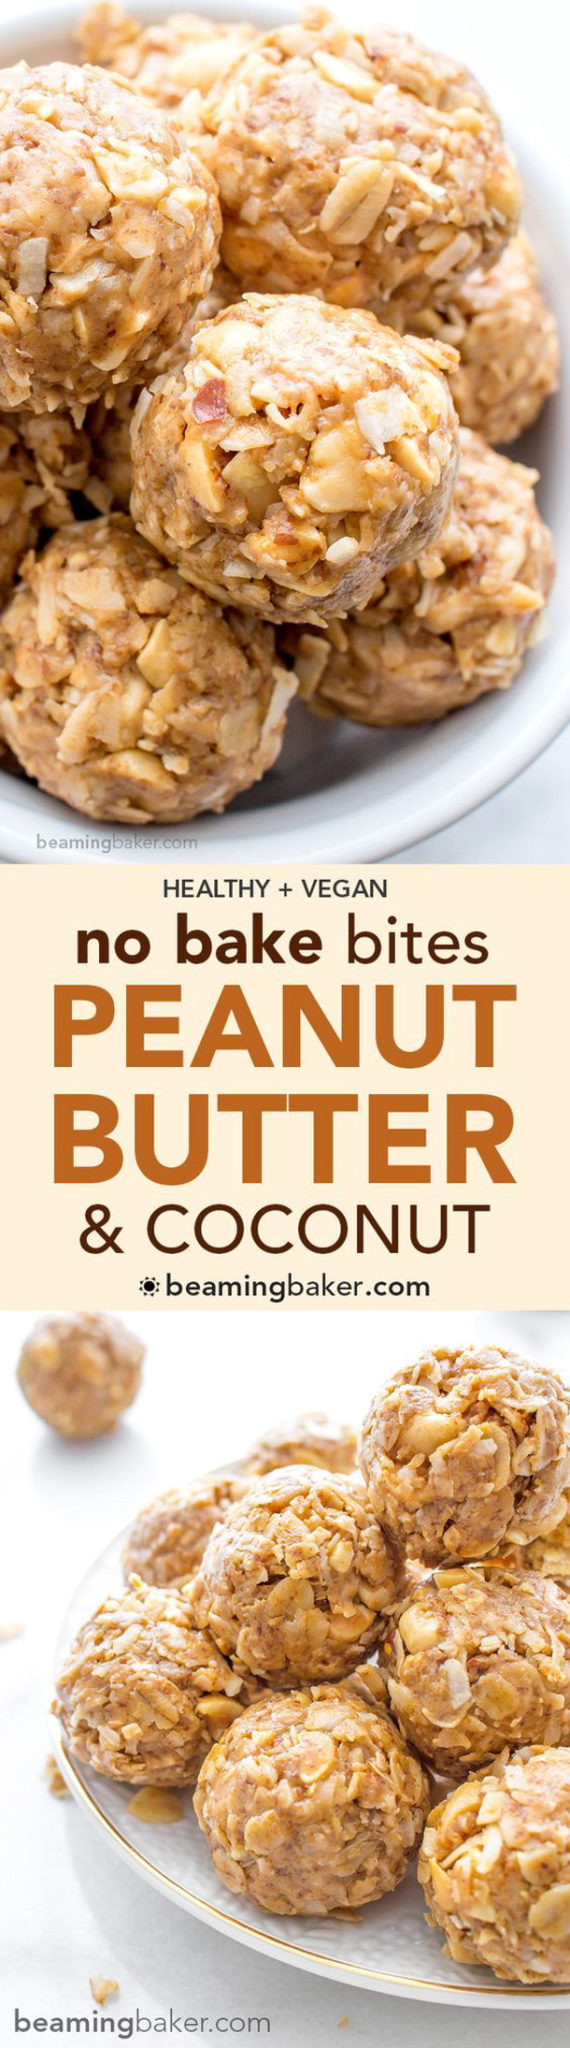 Healthy Snacks With Peanut Butter
 Healthy Snacks and Treats Recipes The BEST and Yummiest